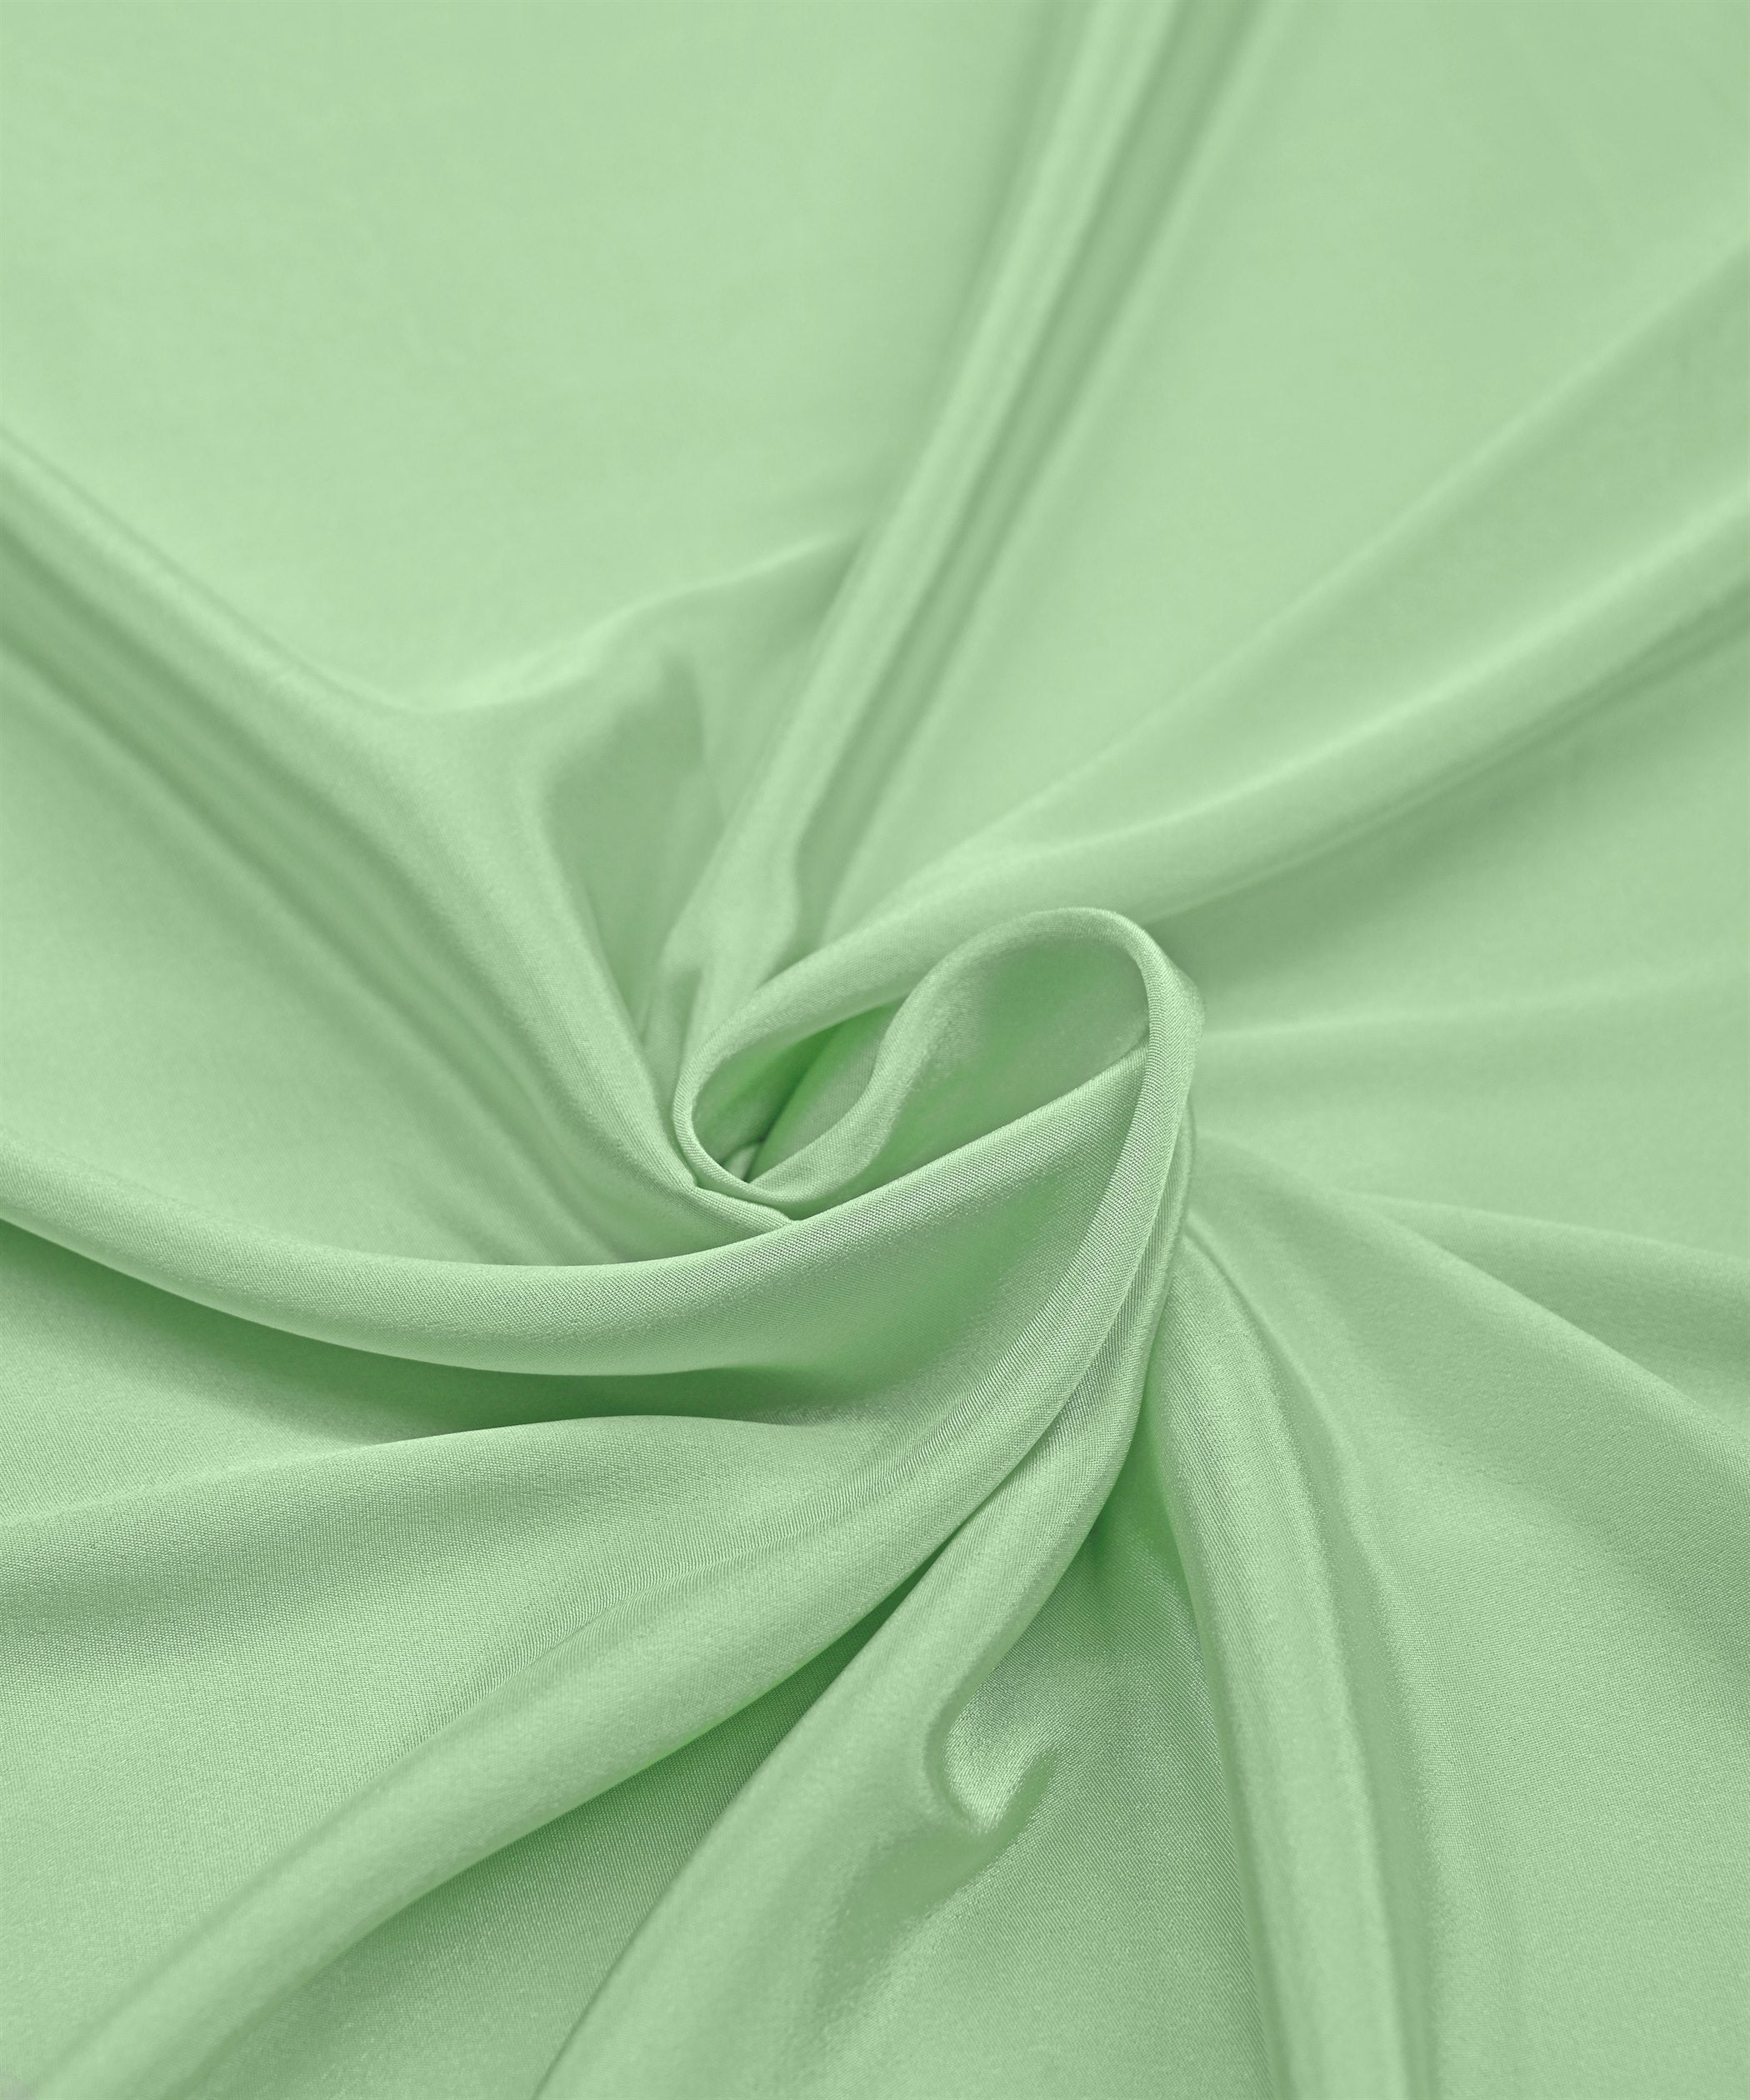 Buy Pista Green Plain Crepe Fabric Online At Wholesale Prices – Fabric Depot